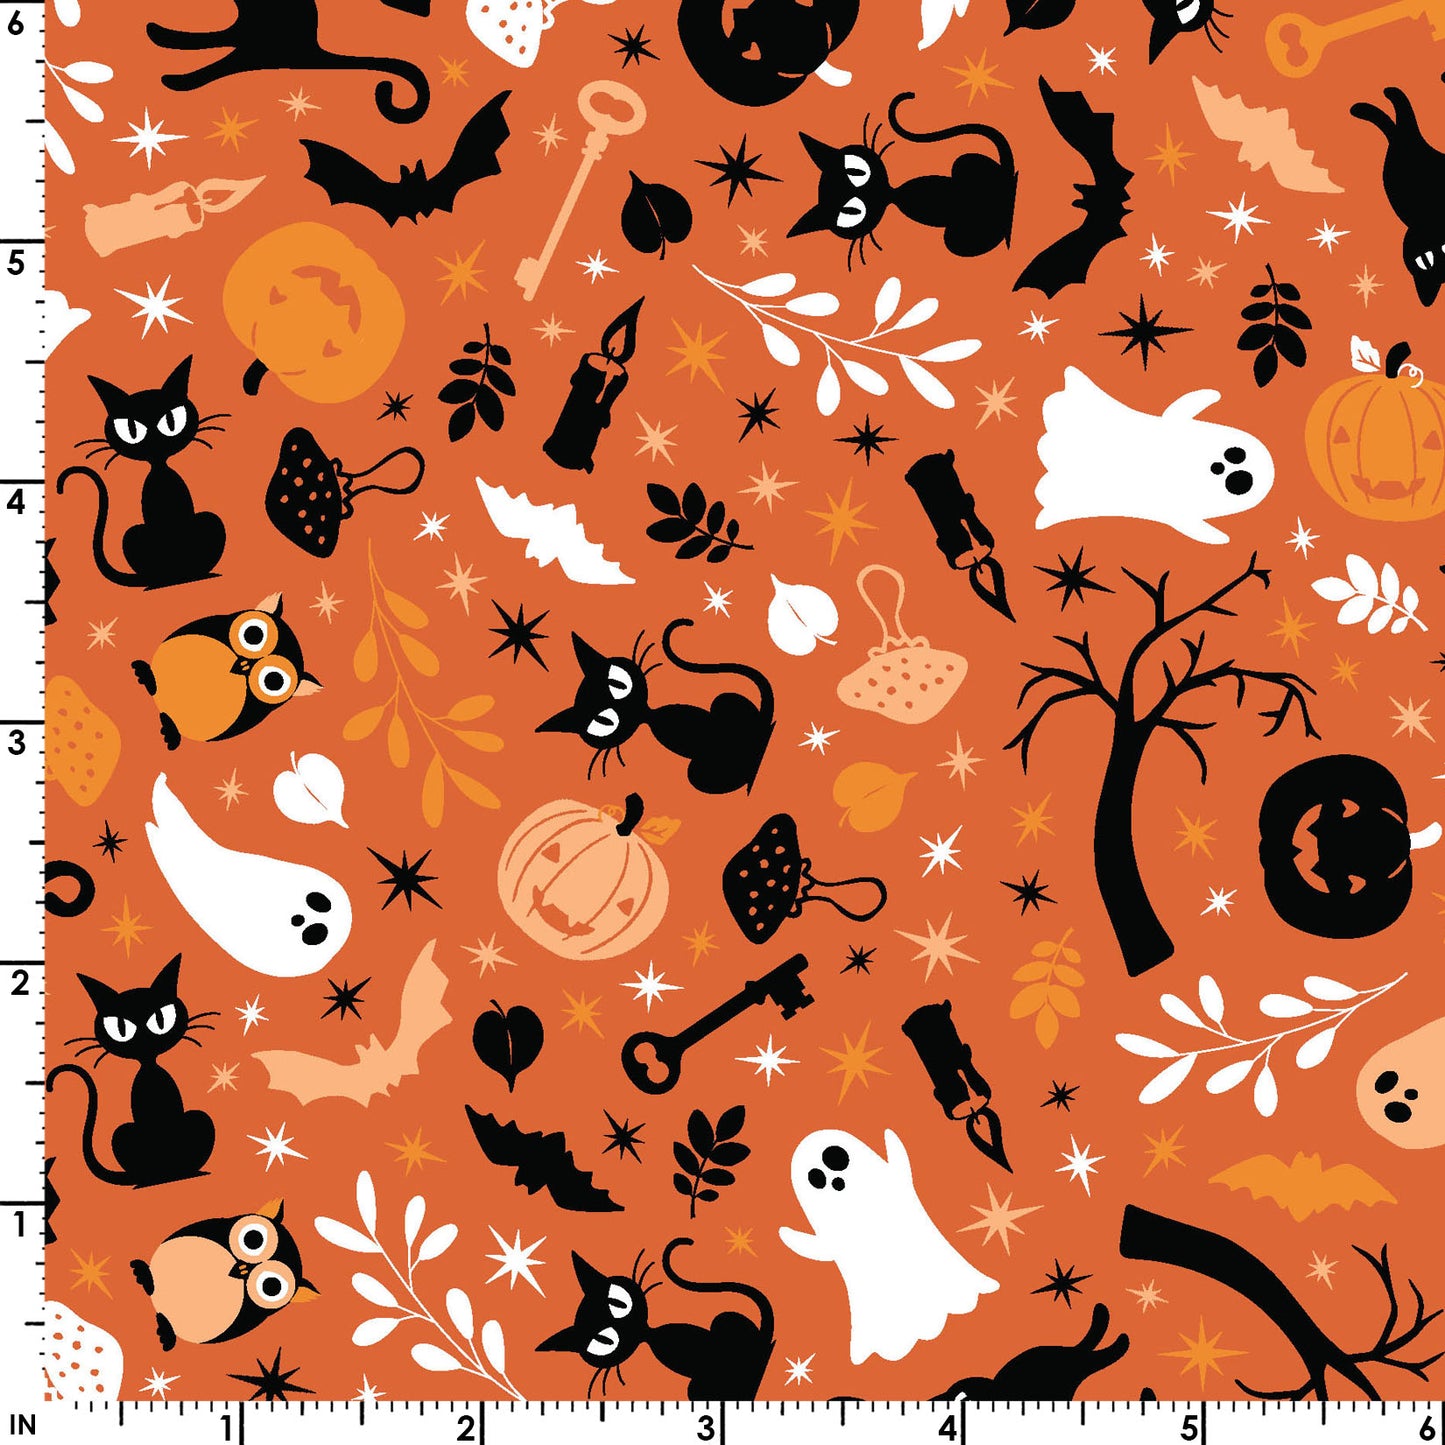 The Cats and Ghosts print on a orange background (MAS10571-O) from the Pumpkin and Potions line by Kimberbell for Maywood Studio features black cats, ghosts, pumpkins, owls, bats, spooky trees, and more. Photo shows details of the designs with a ruler to show the scale.